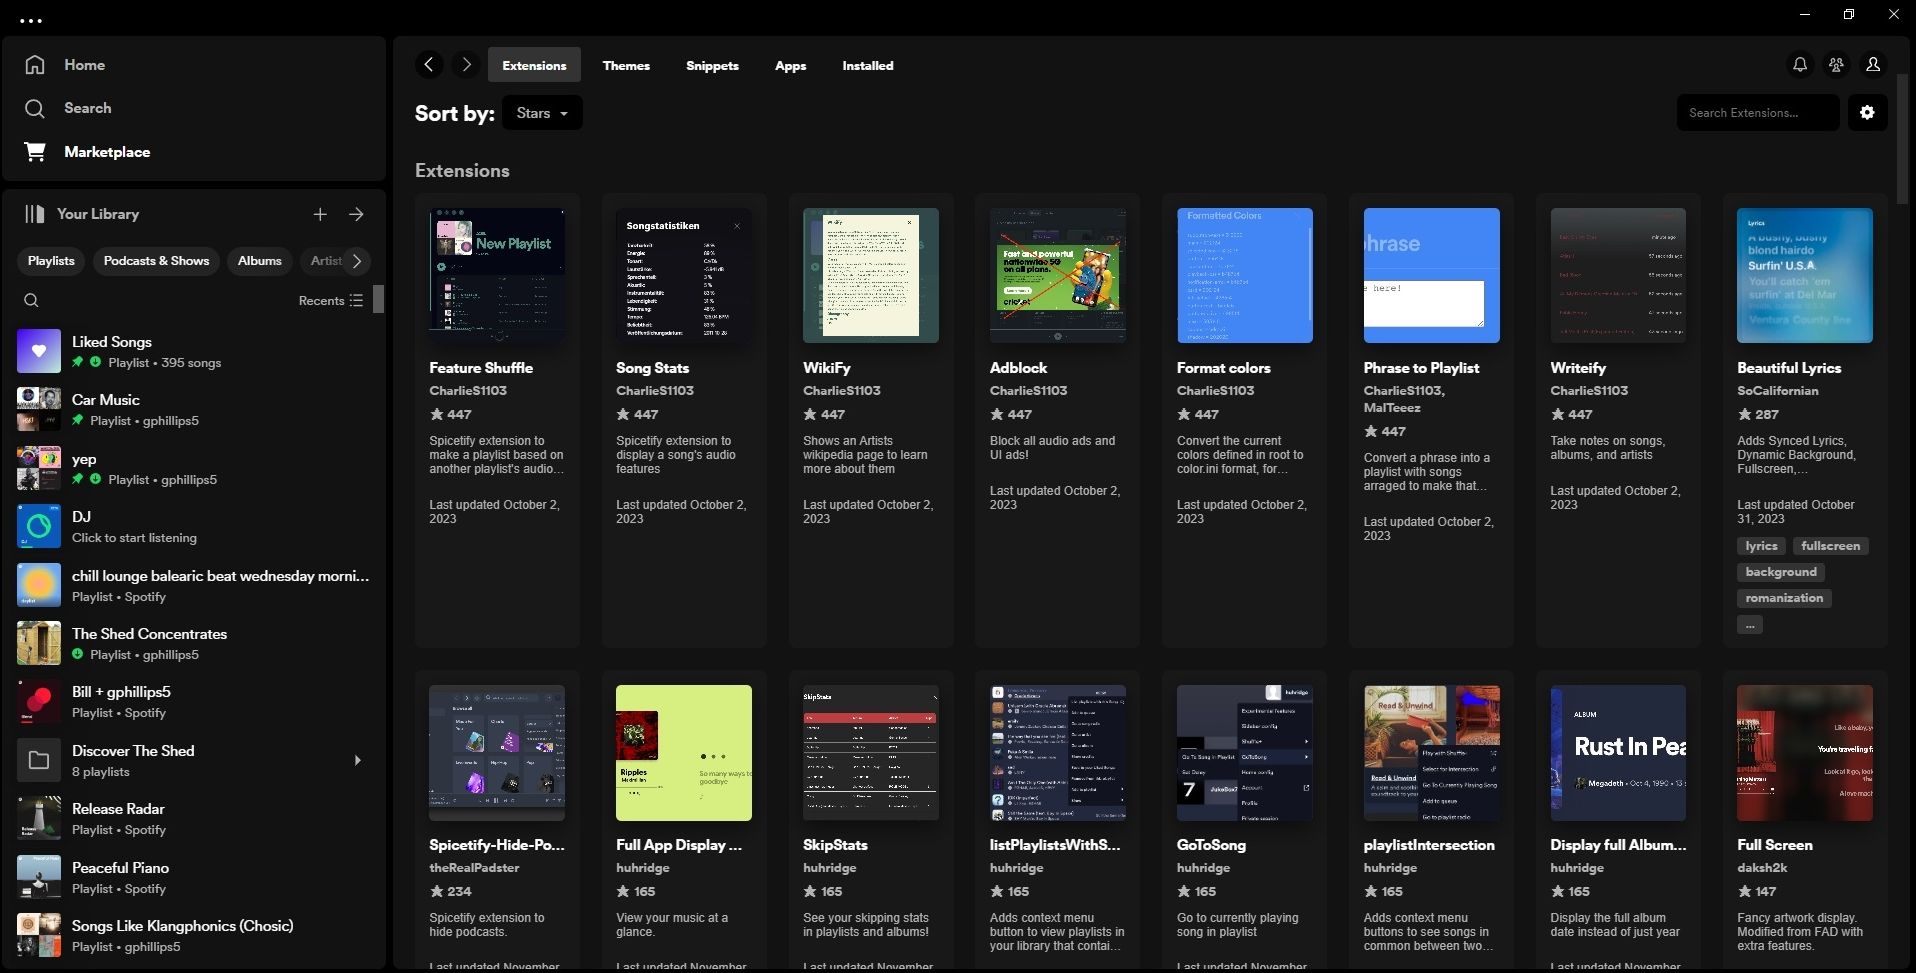 spotify spicetify marketplace extensions tab with options